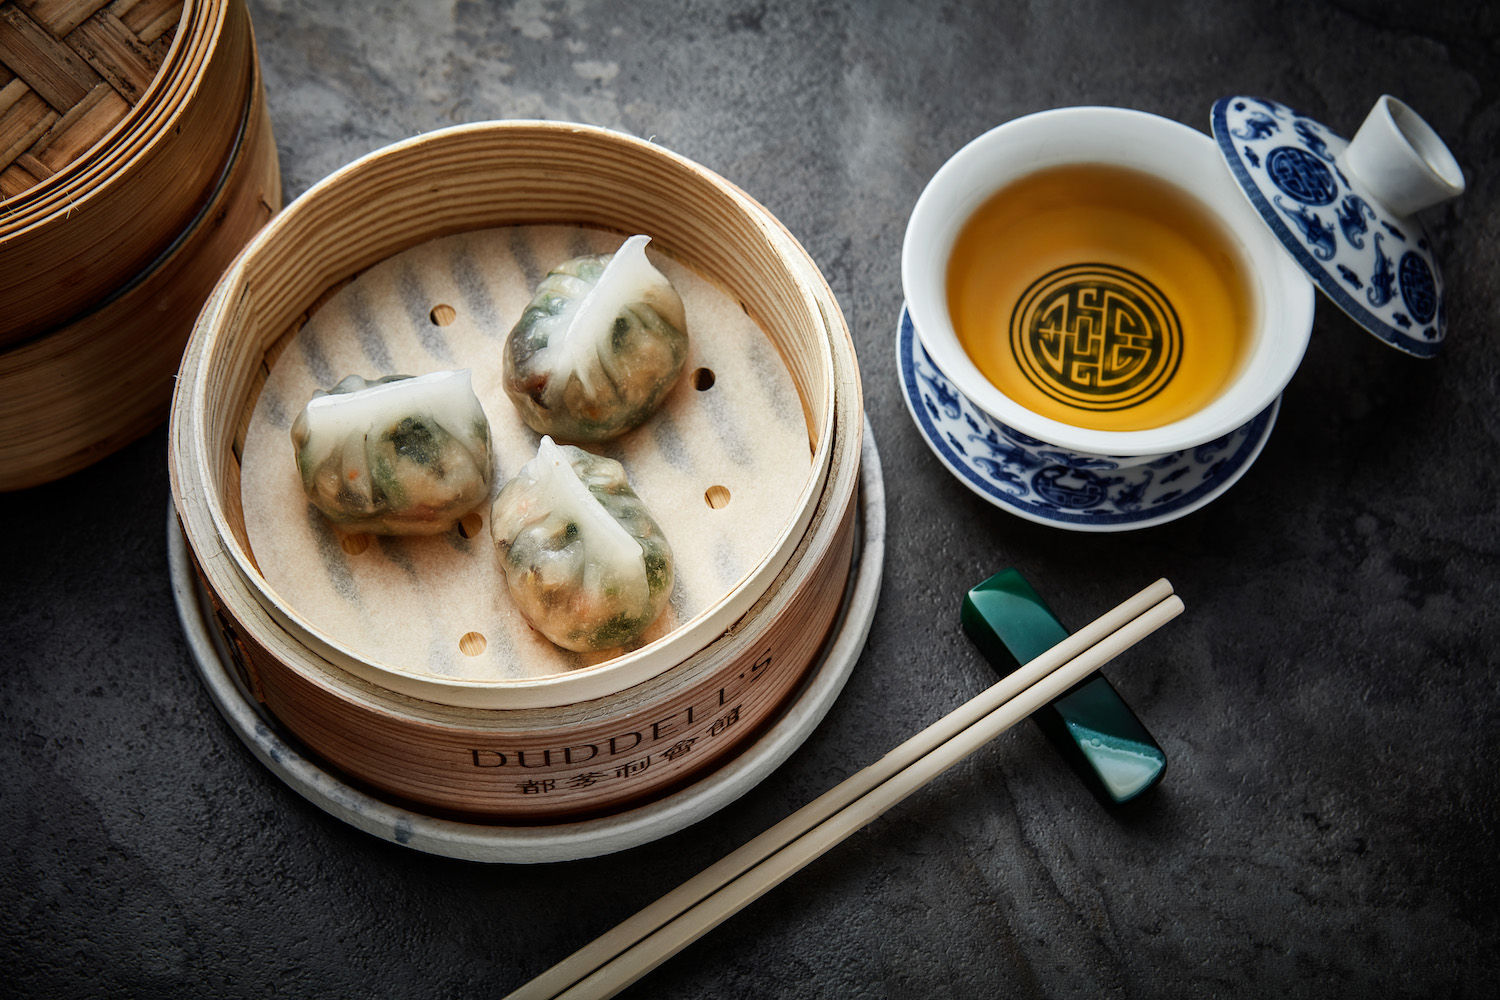 10 new Hong Kong restaurants to try in October 2019